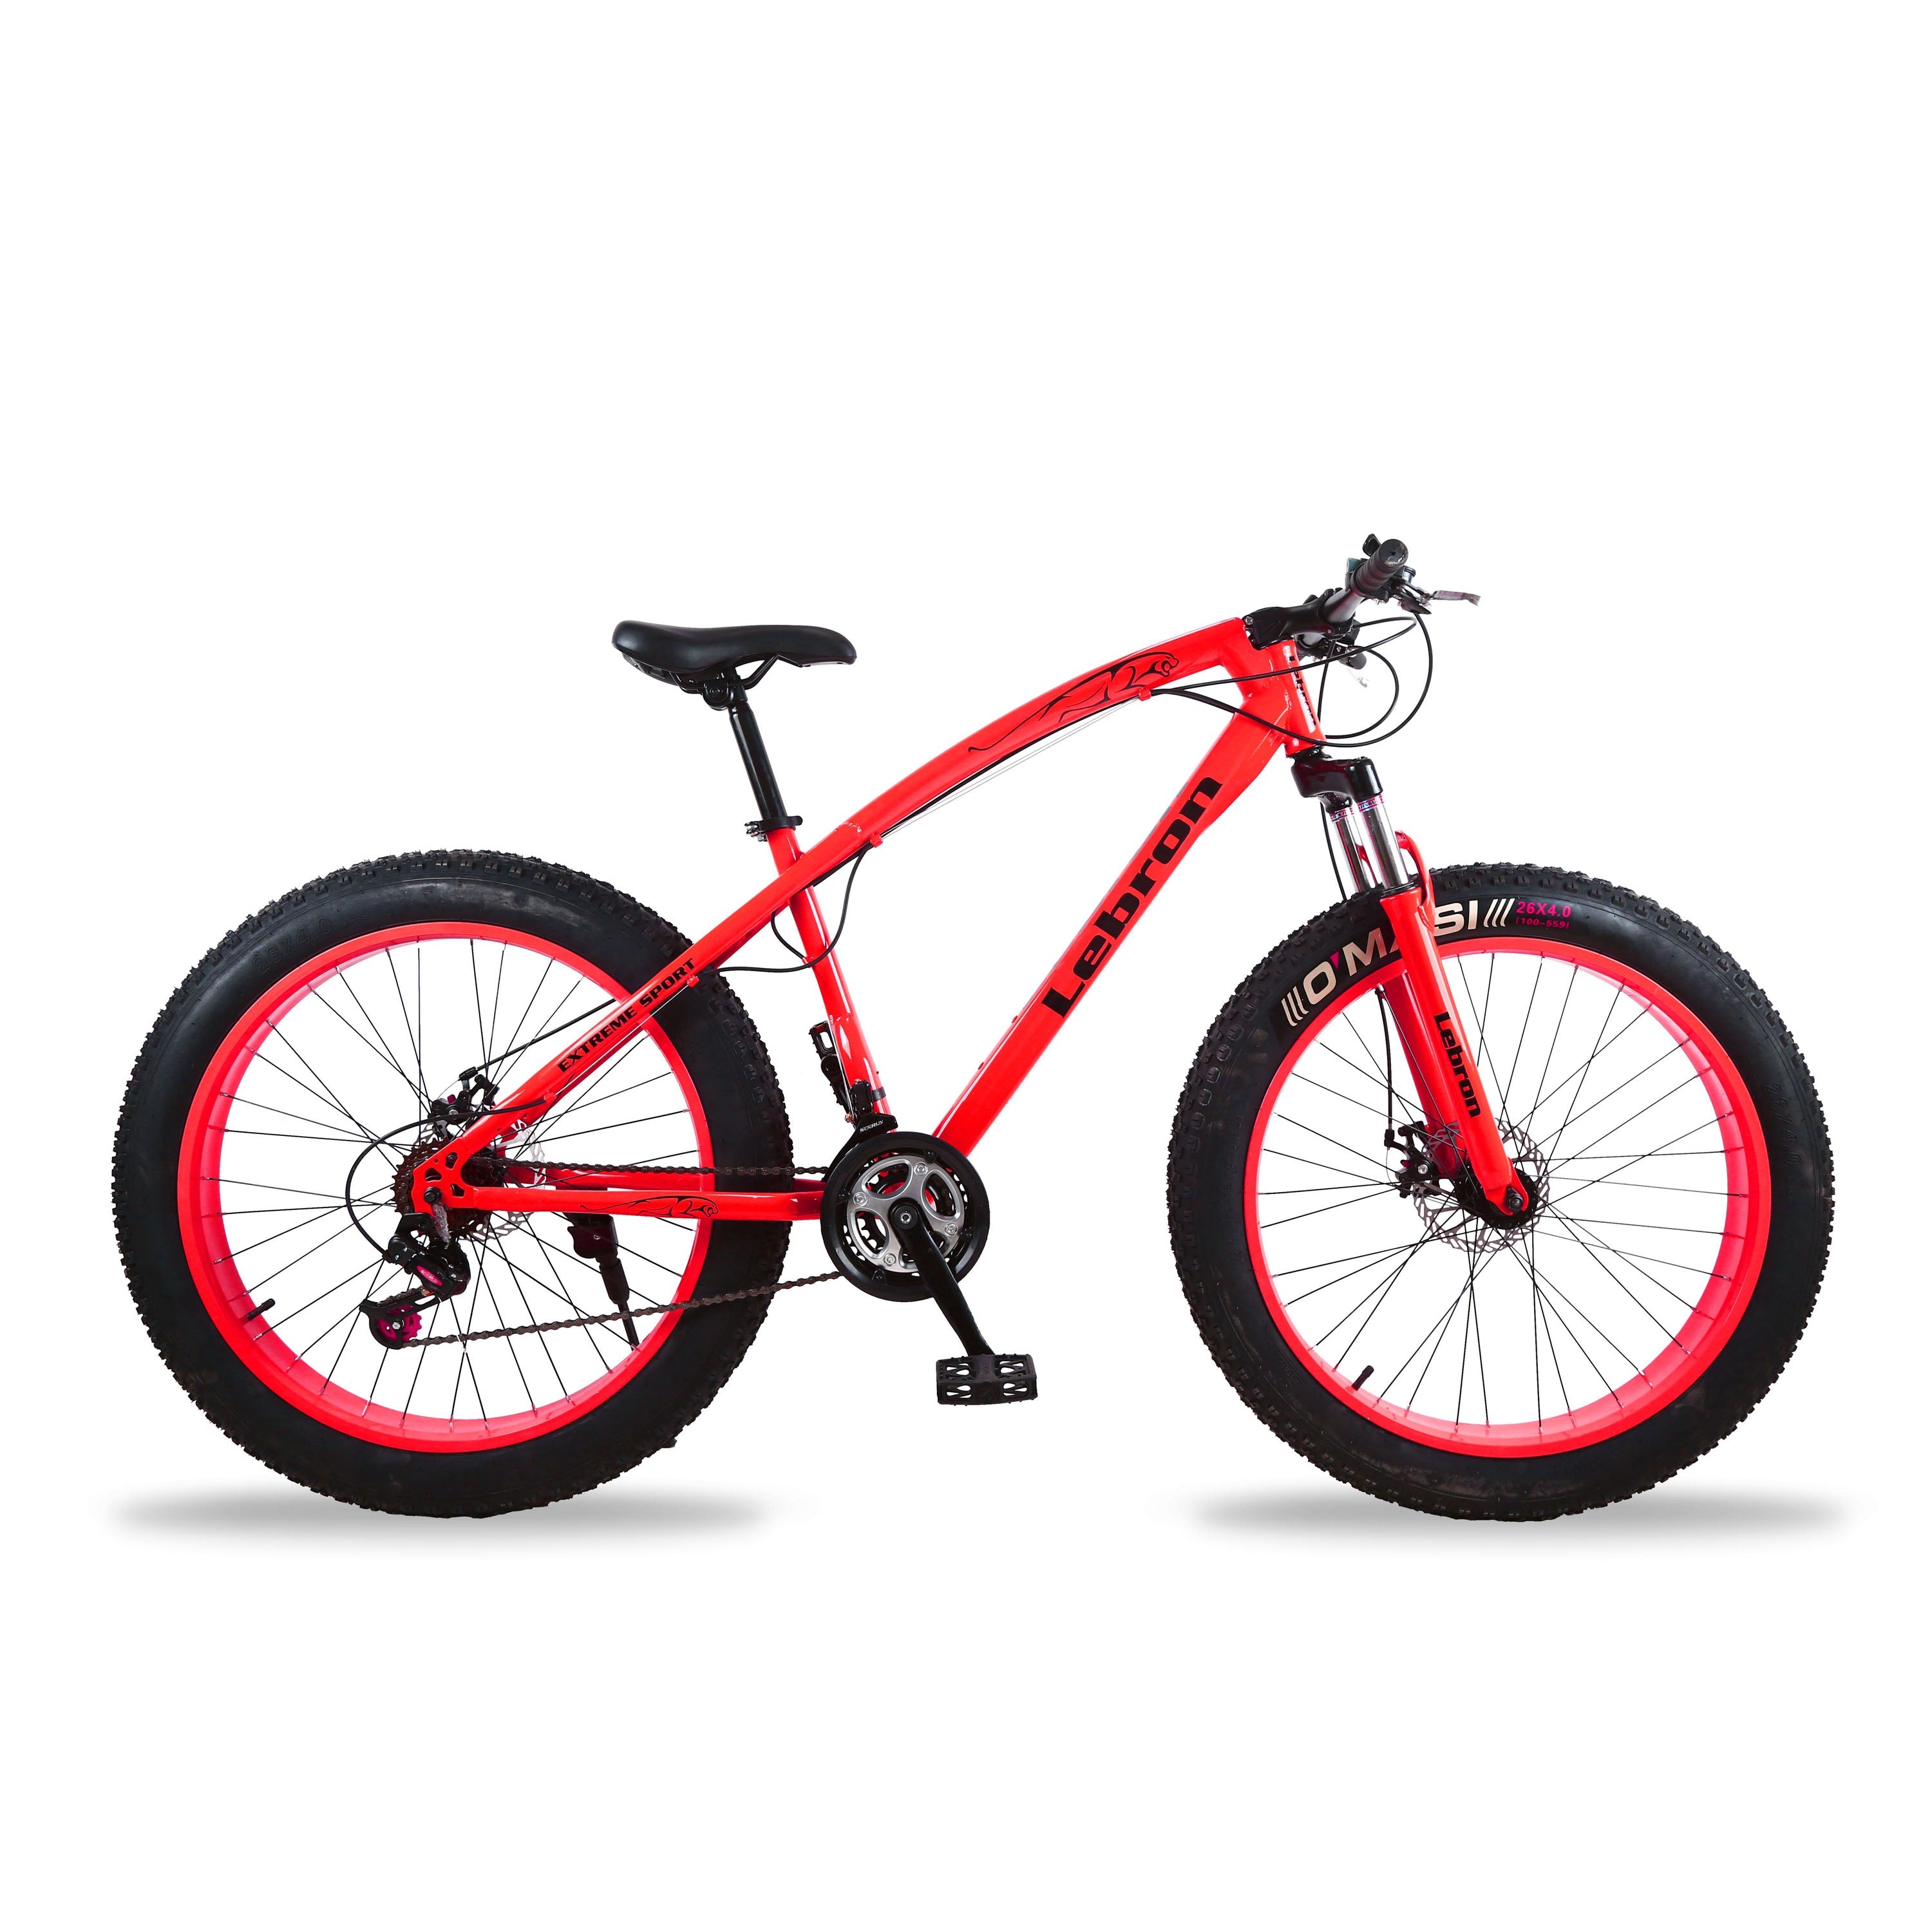 Red Colour Adult Mountain Bike 26’ Fat tyres, 21 Gears - ENER-J Smart Home